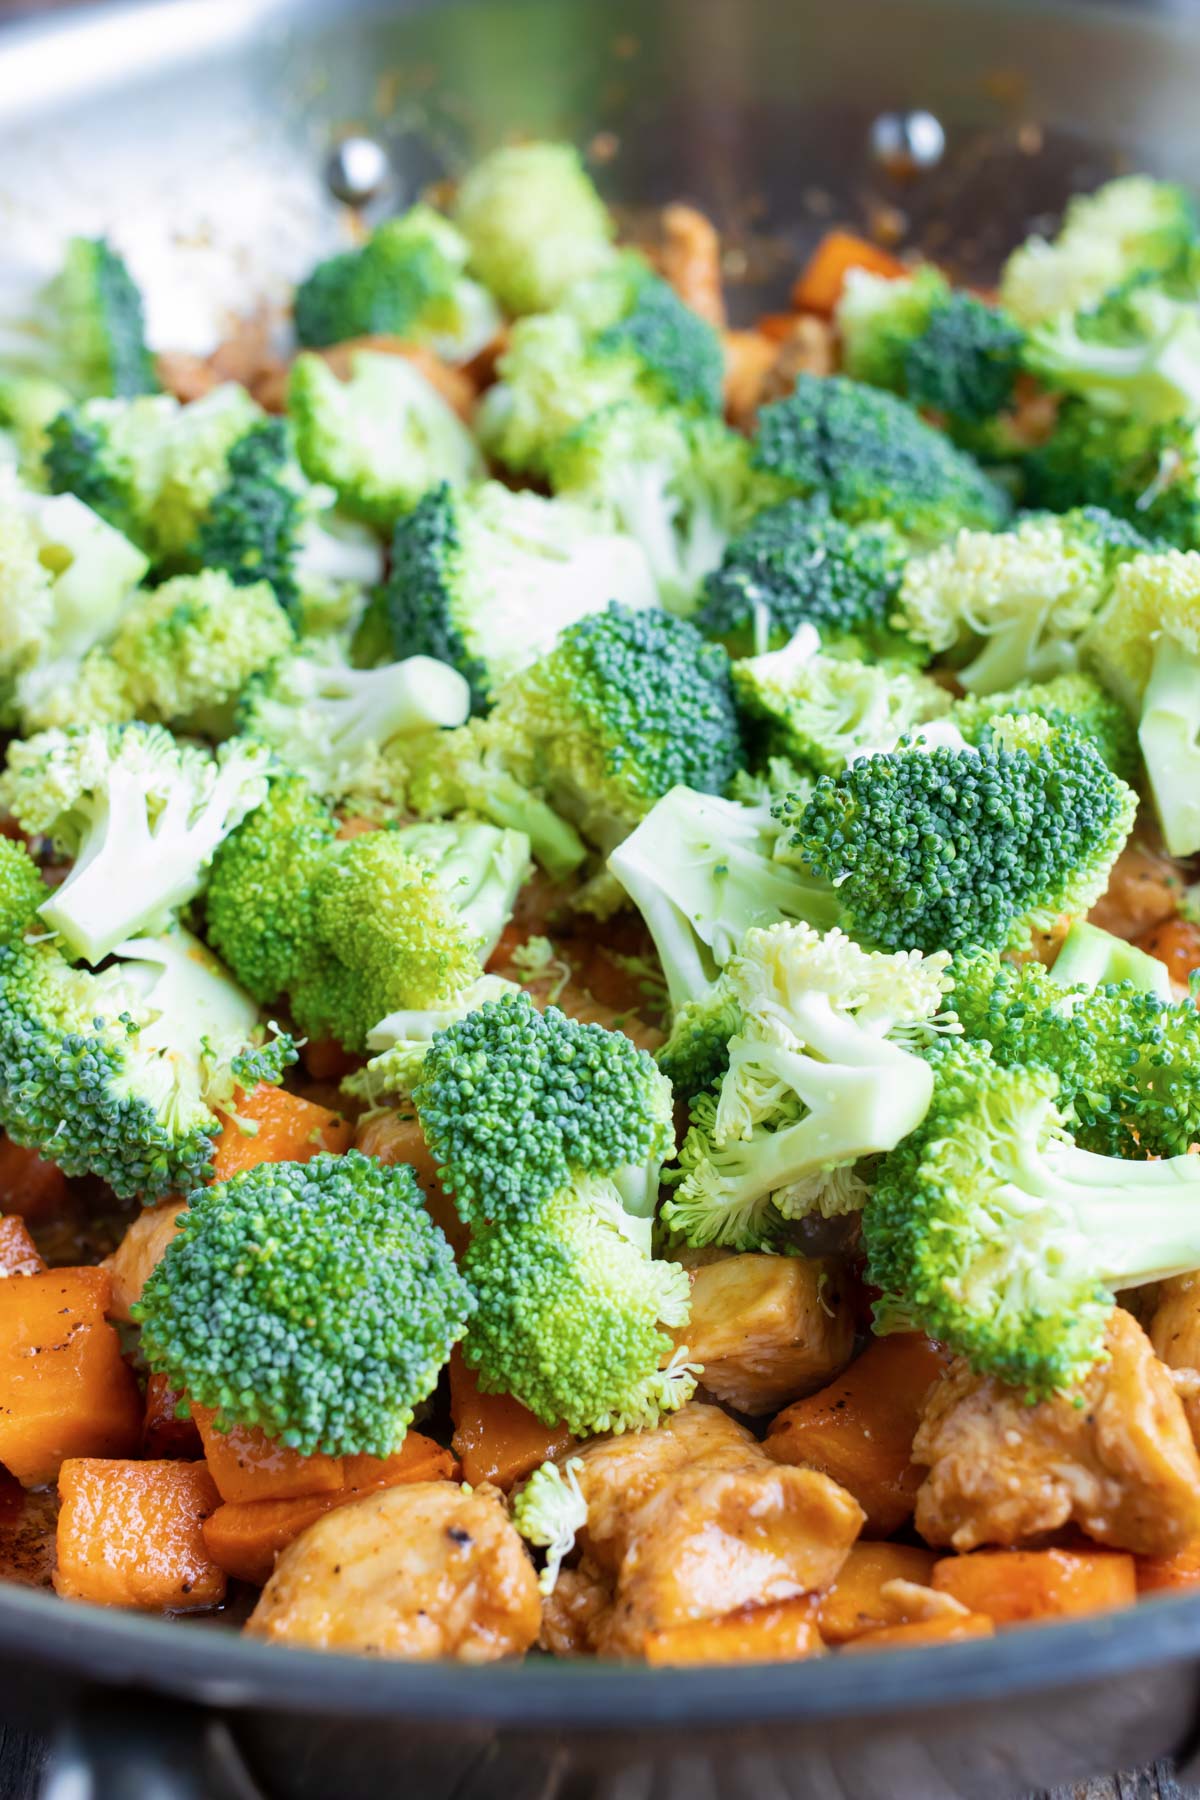 Broccoli is set on top of chicken and sweet potatoes.